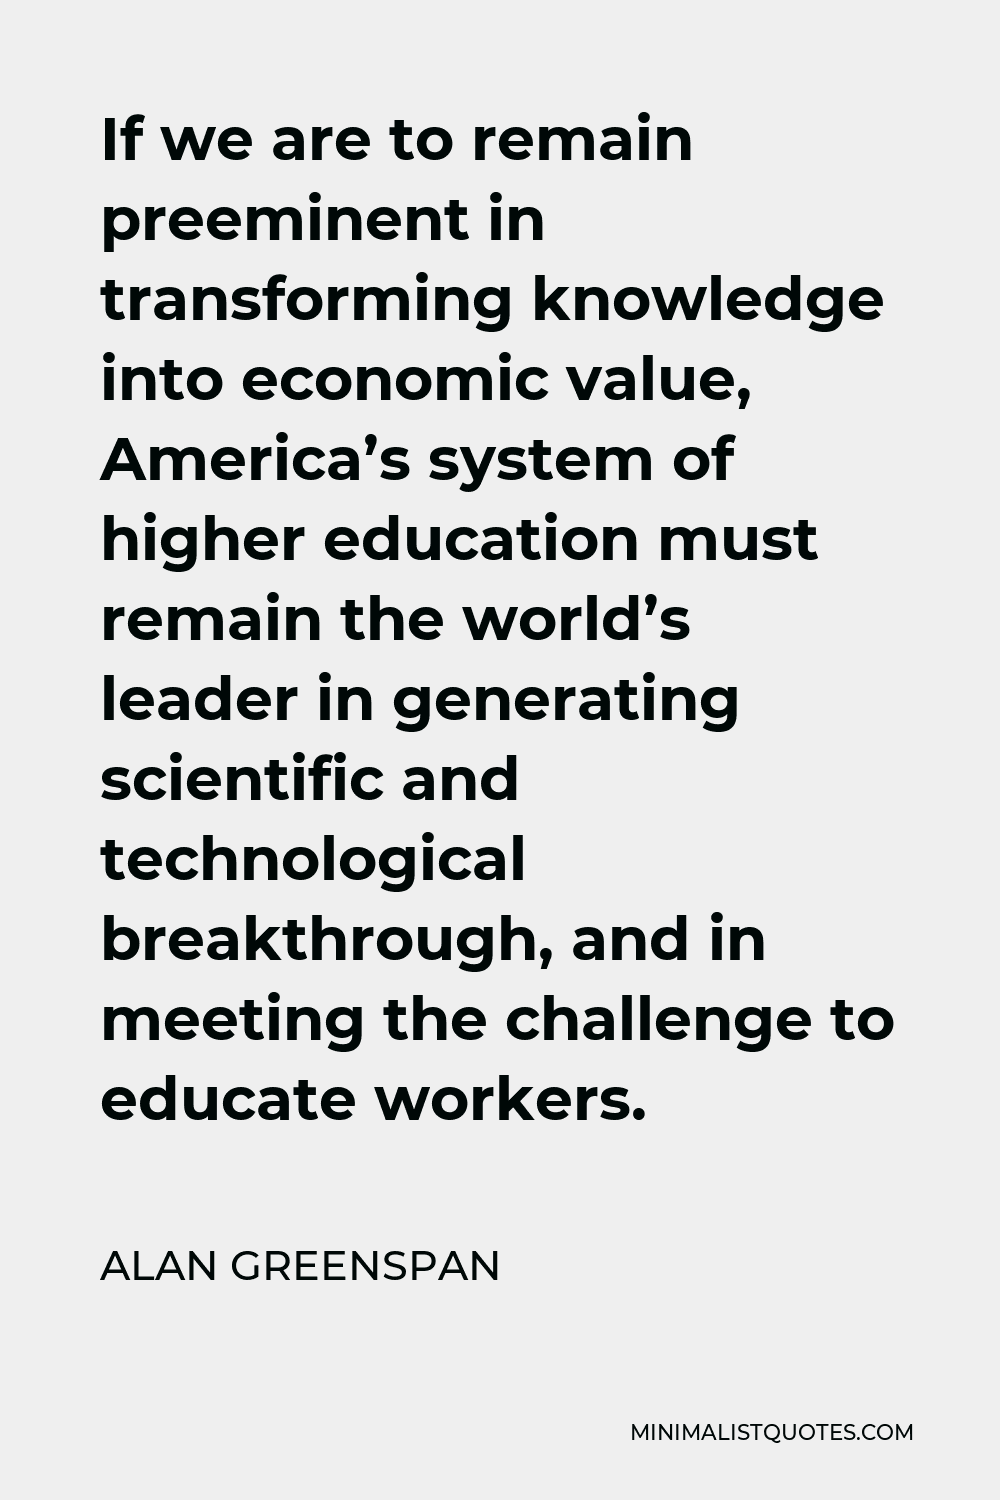 Alan Greenspan Quote - If we are to remain preeminent in transforming knowledge into economic value, America’s system of higher education must remain the world’s leader in generating scientific and technological breakthrough, and in meeting the challenge to educate workers.